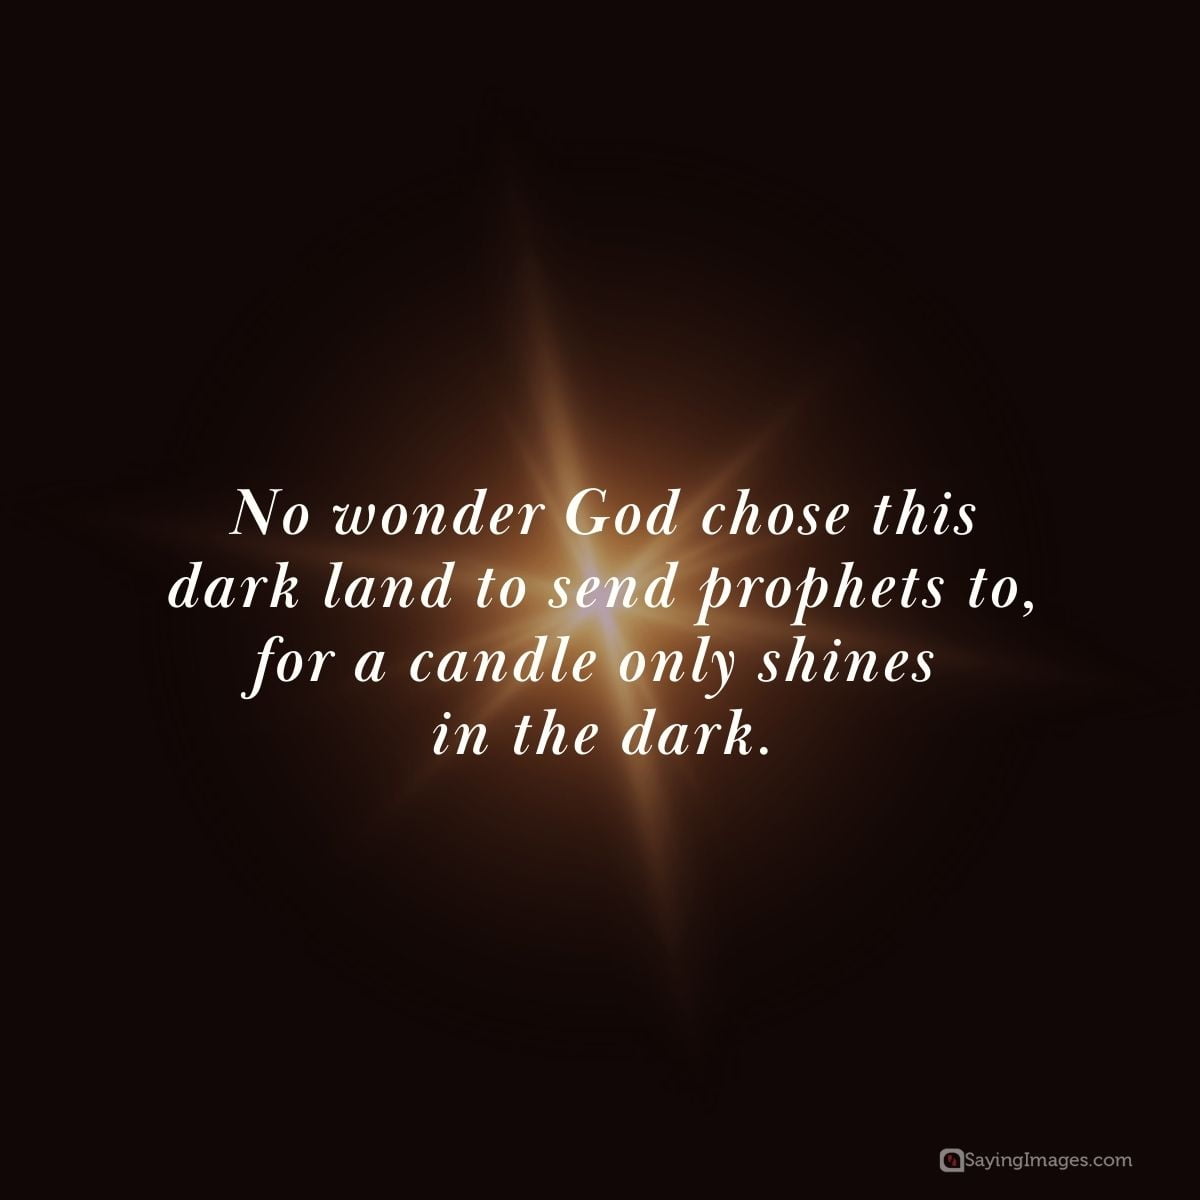 No wonder God chose this dark land to send prophets to, for a candle only shines in the dark